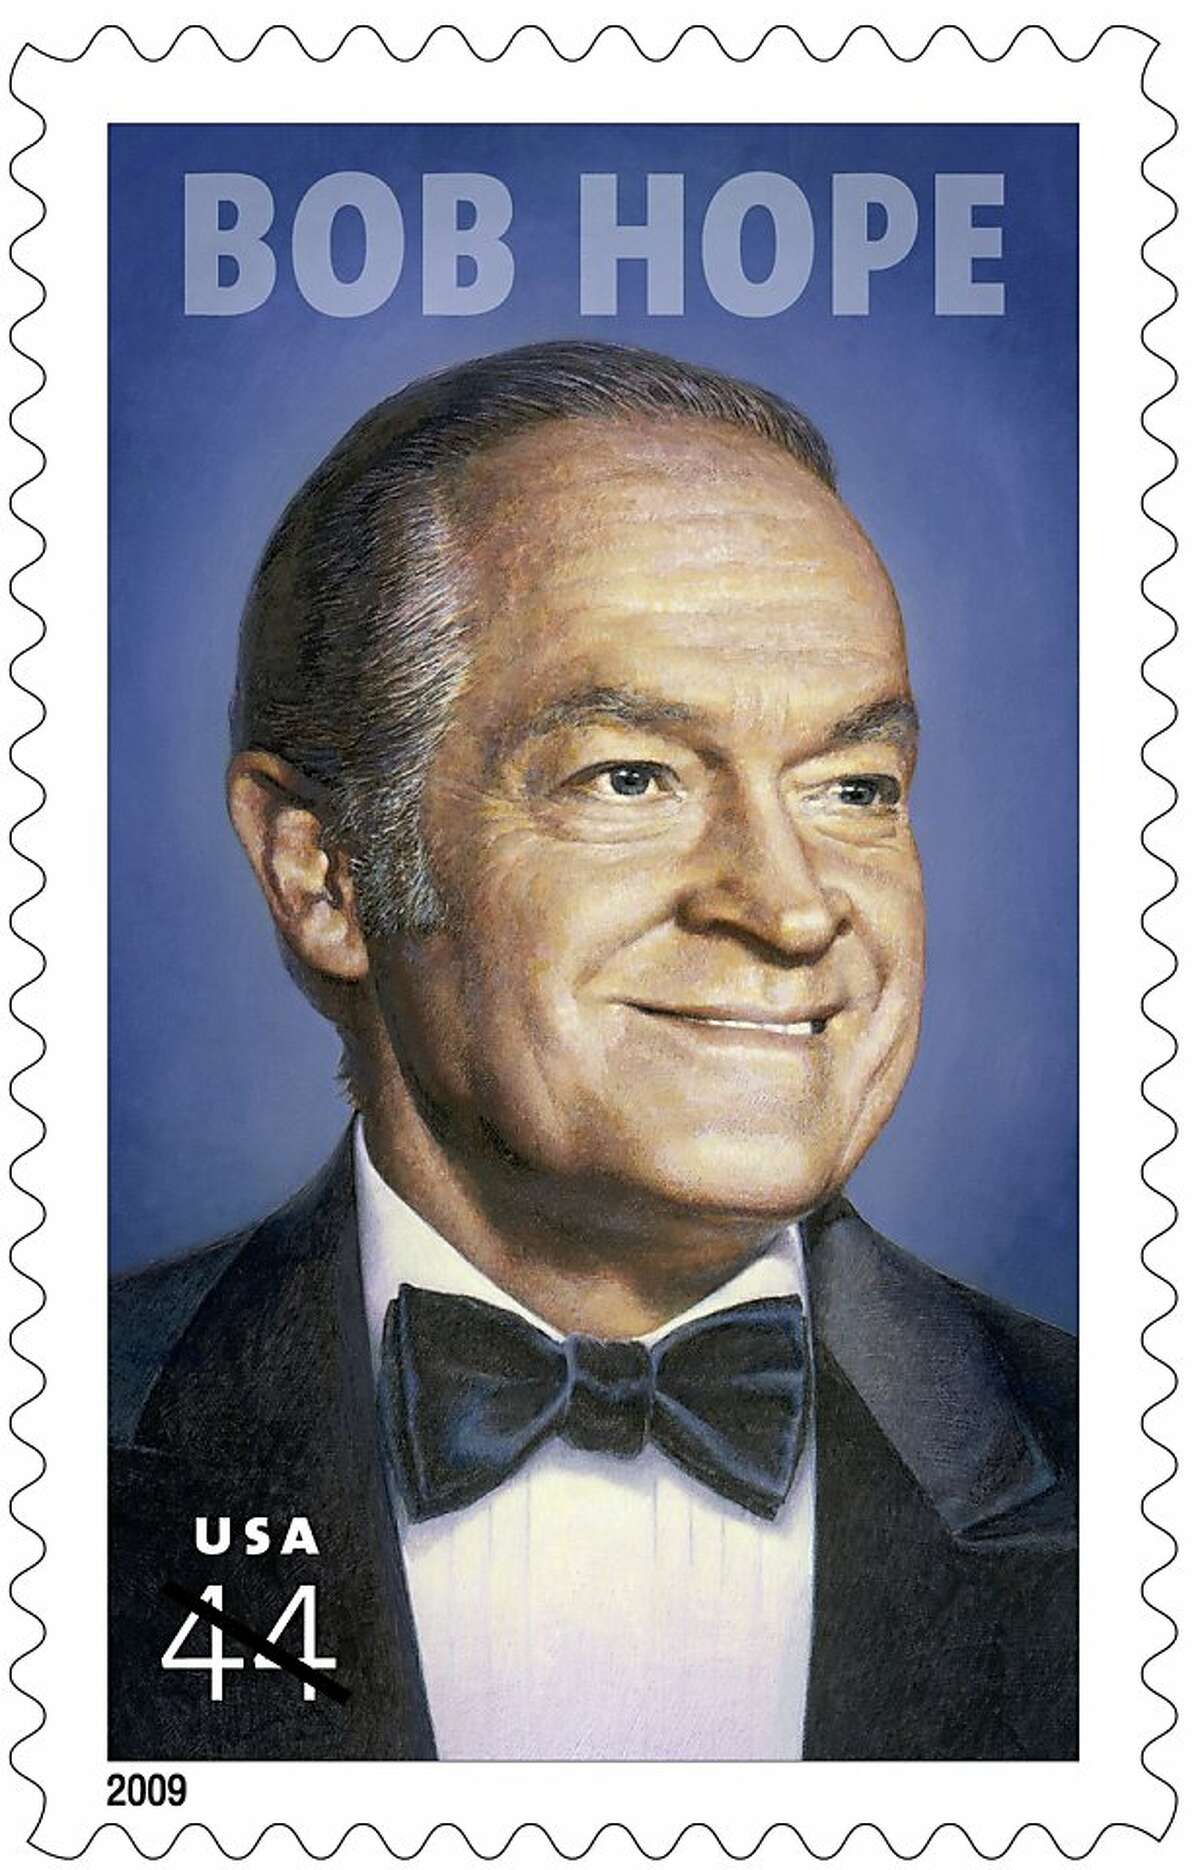 This undated handout image provided the the U.S. Postal Service shows the 44-cent postage stamp honoring Bob Hope. The comedian famed for his tireless travel to entertain American servicemen and women around the world is being honored with a 44-cent postage stamp Friday in ceremonies aboard the U.S.S. Midway in San Diego. (AP Photo/USPS) Ran on: 05-29-2009 The Bob Hope stamp honors his travel to entertain troops. Ran on: 05-29-2009 The Bob Hope stamp honors his travel to entertain troops.